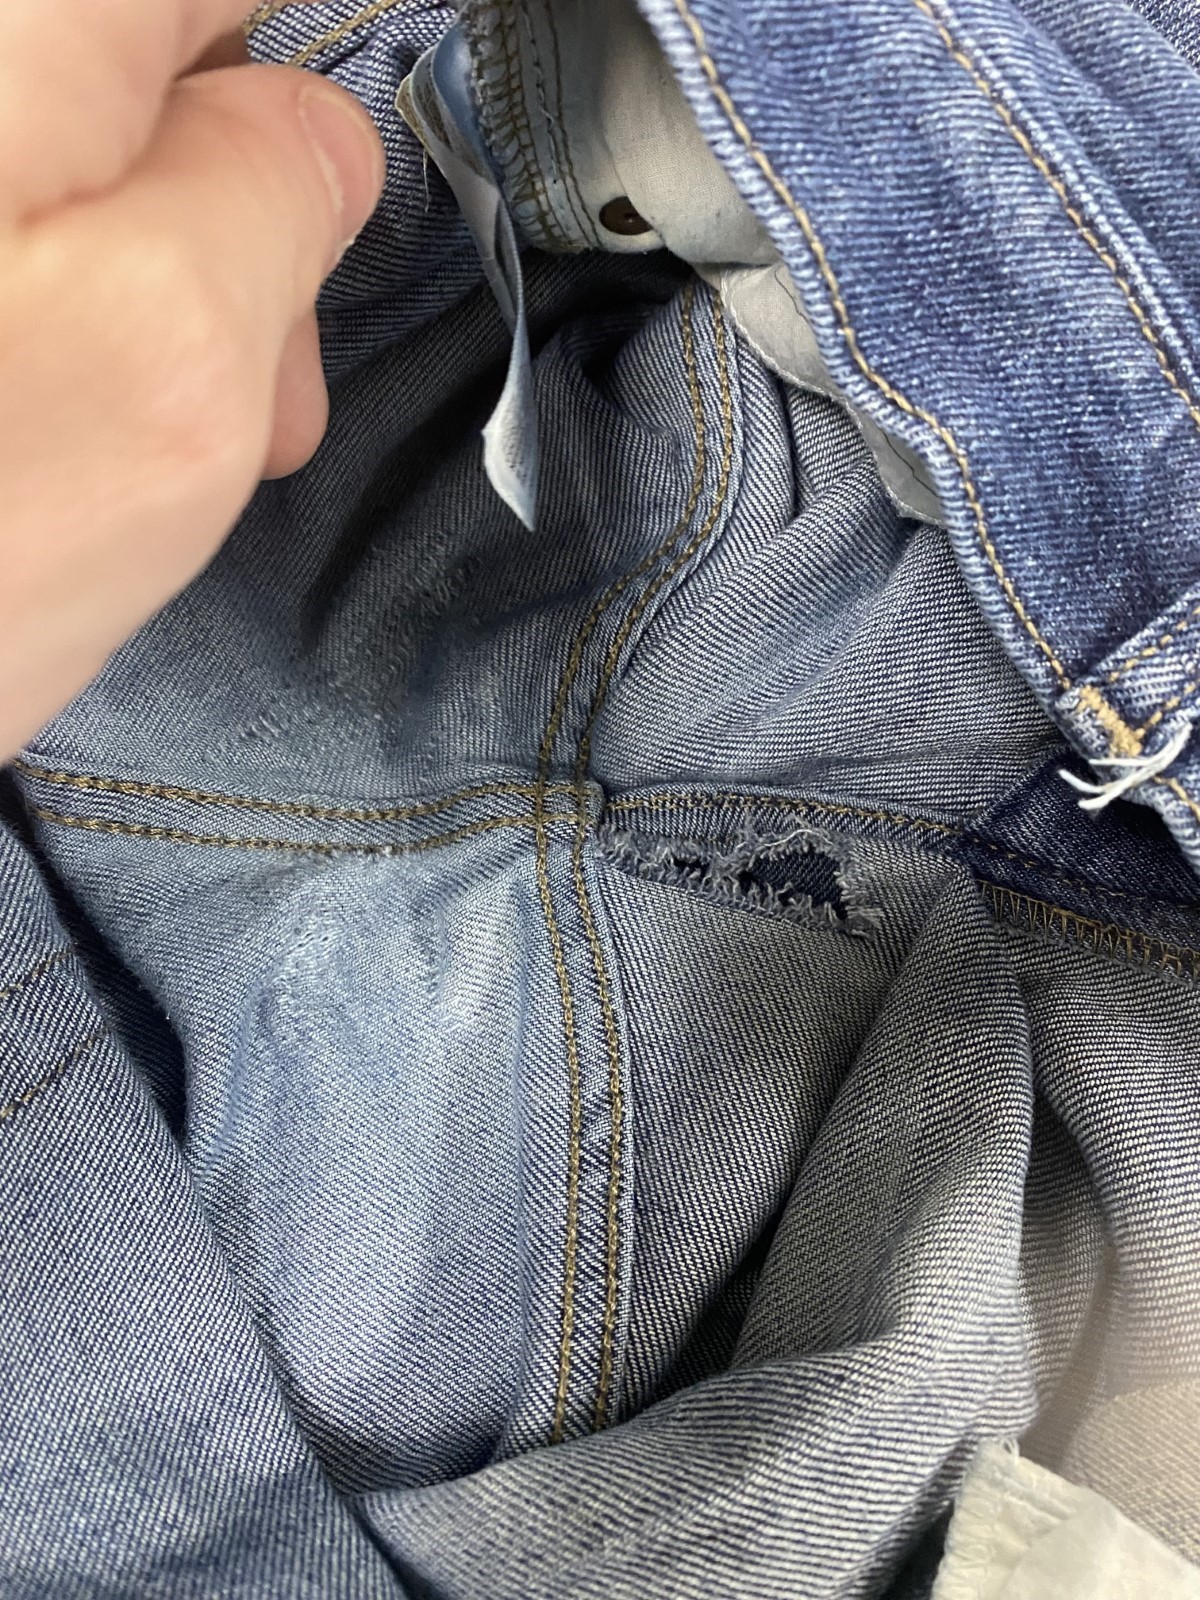 Interior of jeans to be repaired